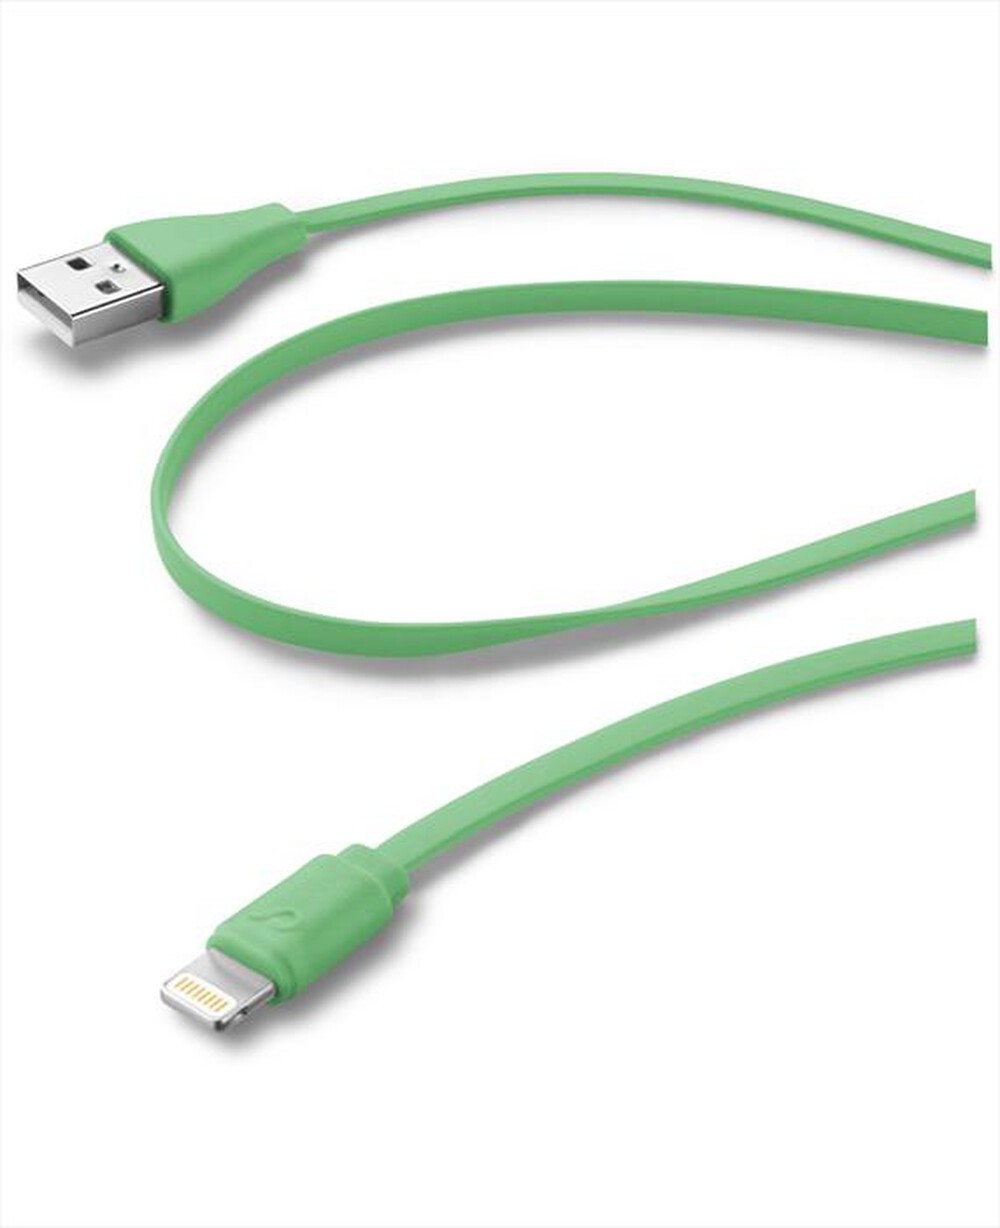 "CELLULARLINE - Flat USB Data Cable For iPhone USBDATACFLMFIIPH5G-Verde"